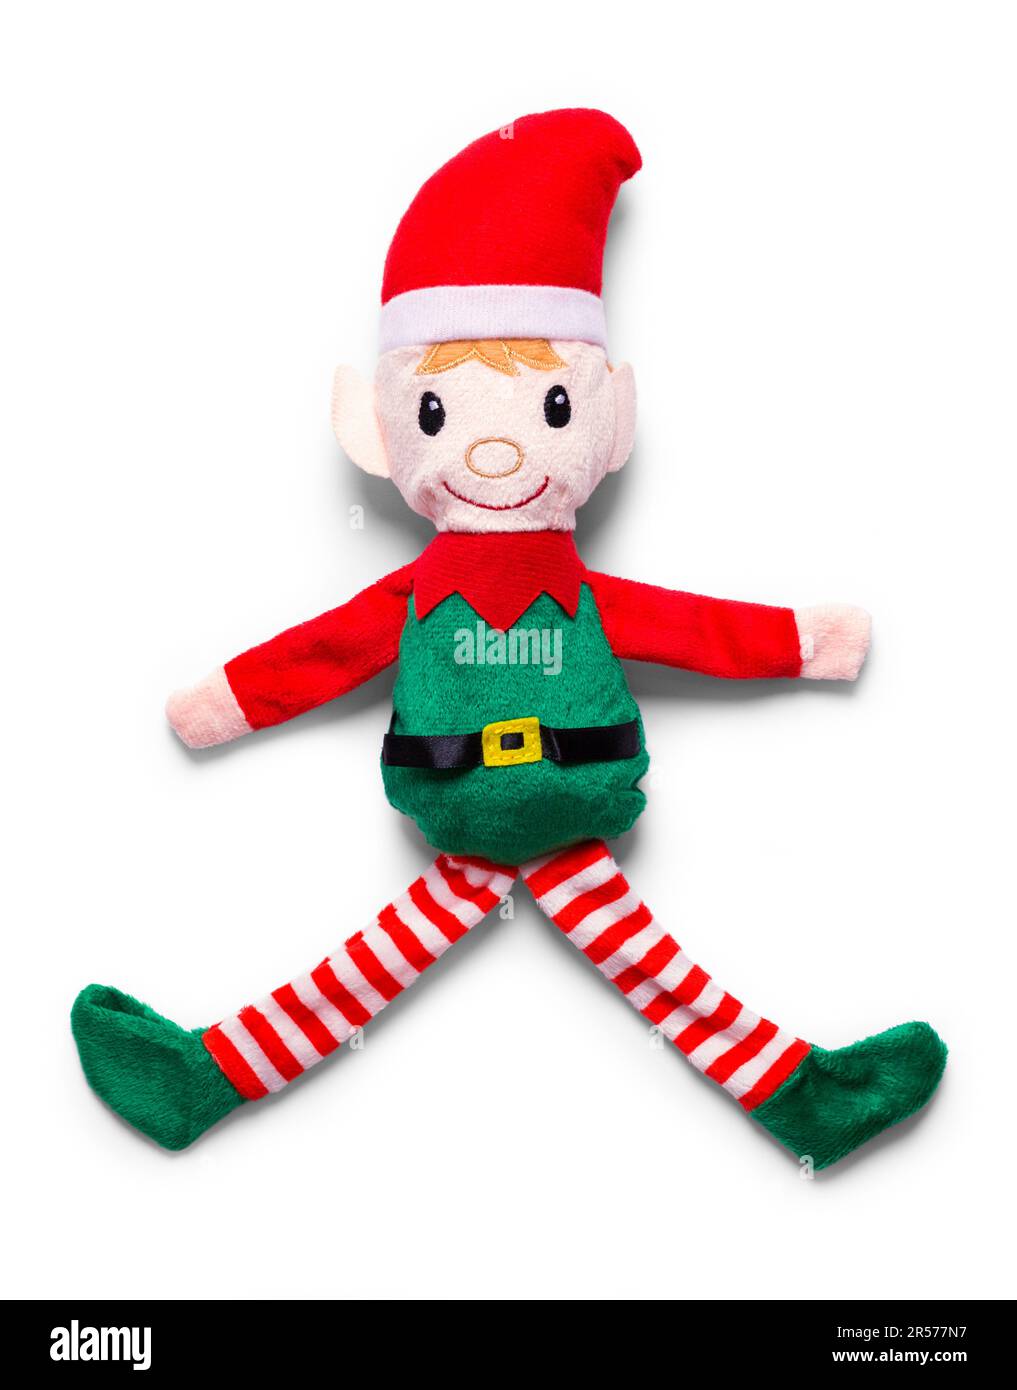 Stuffed Christmas Elf Toy Cut Out on White. Stock Photo